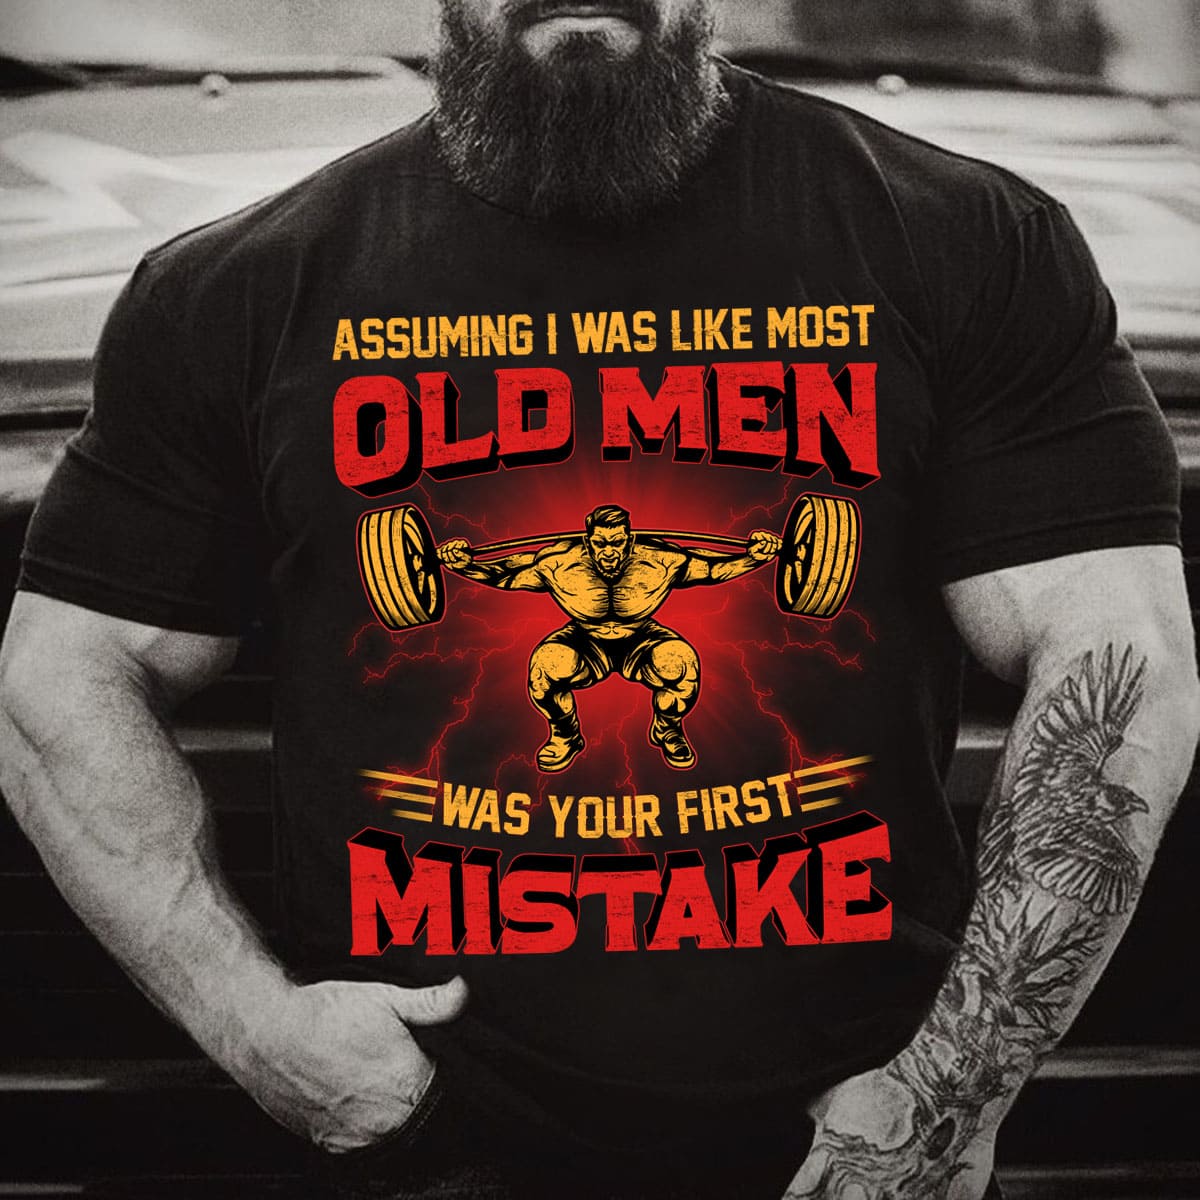 Assuming I was like most old men was your first mistake - Old man bodybuilders, strong man lifting weights